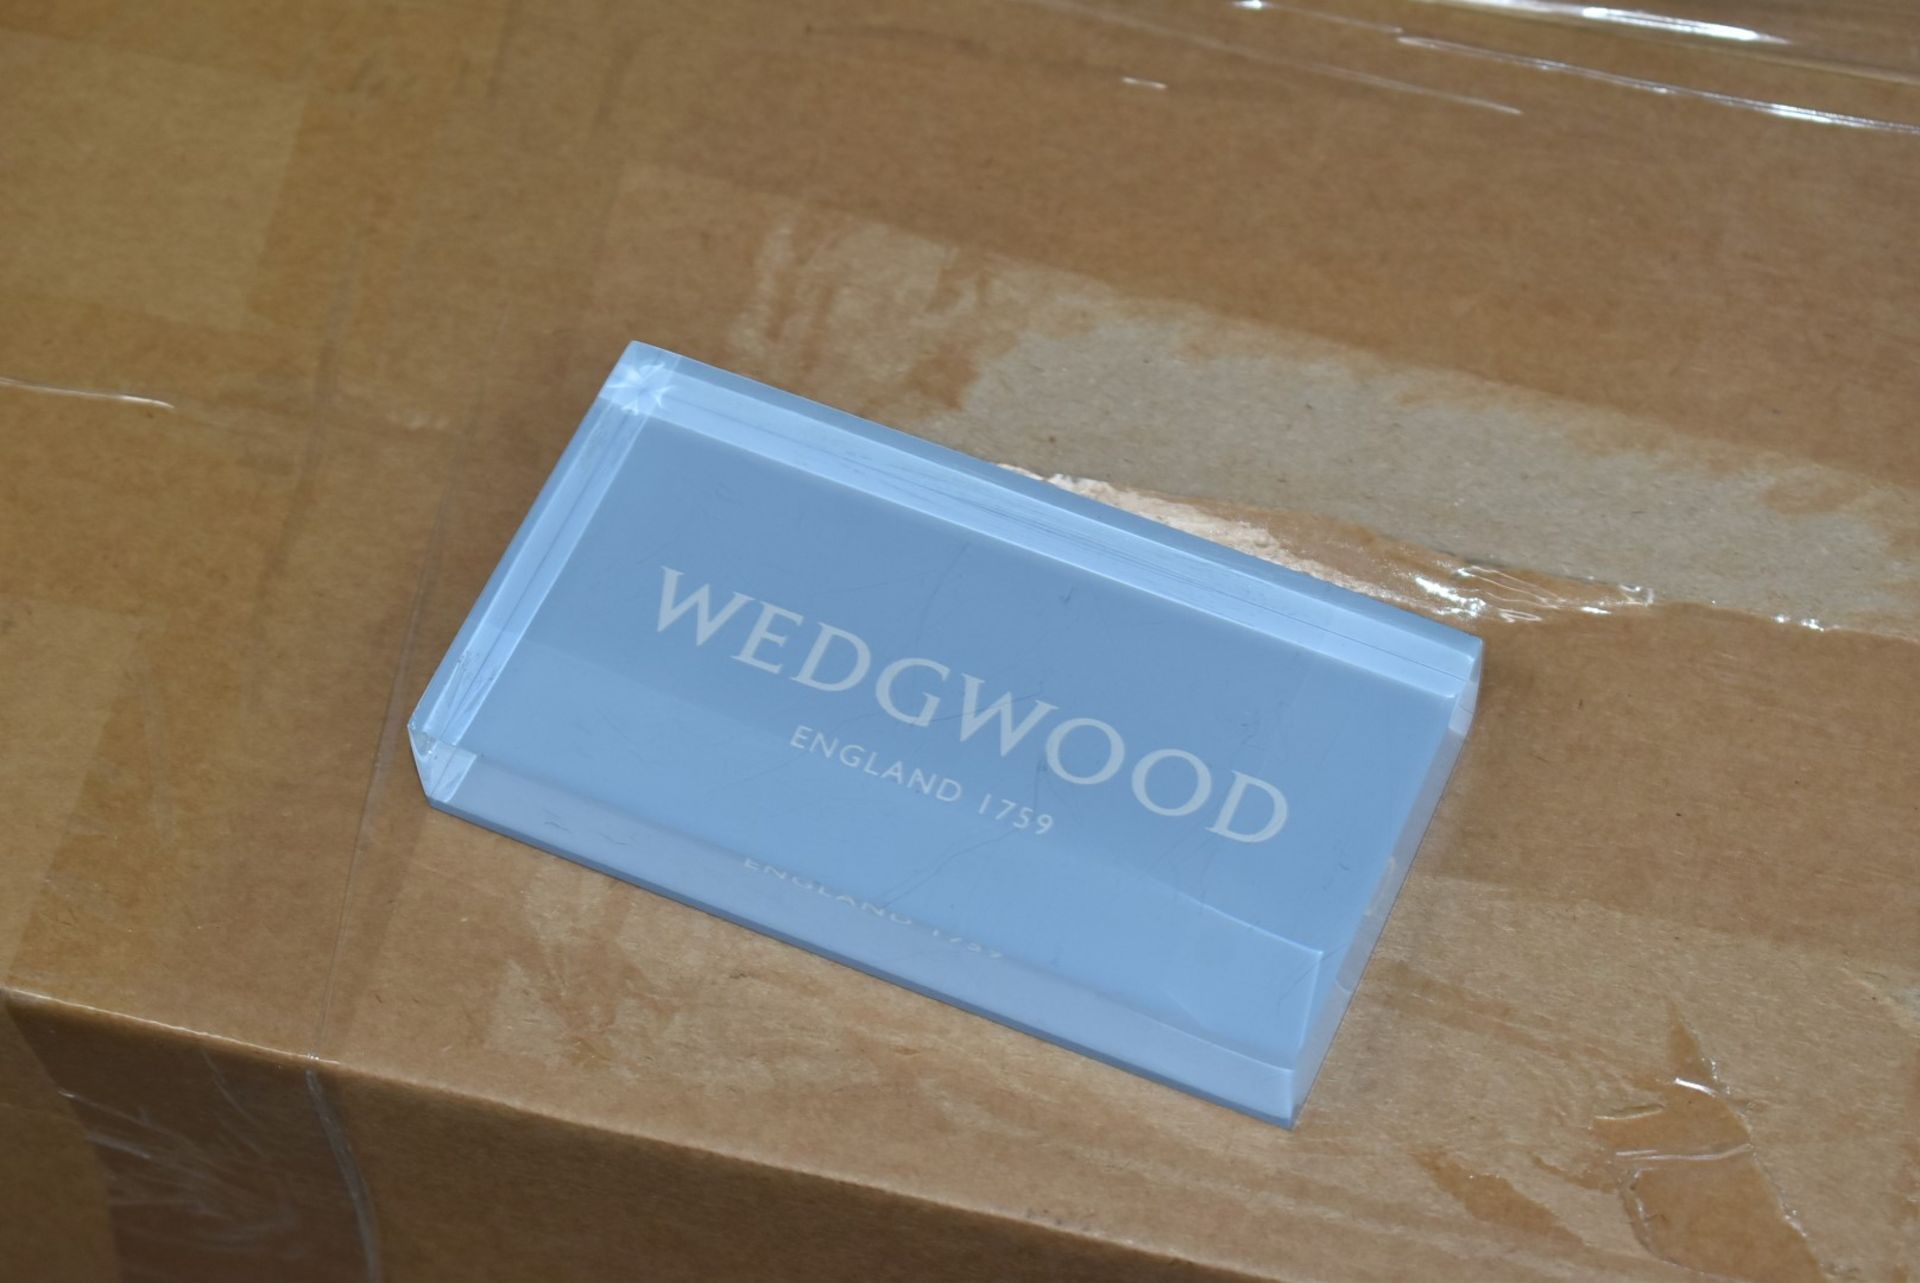 1 x Wedgewood Retail Pack - Includes 3 x Various Sized Decoration Hanger Stands, Advertisement - Image 4 of 5